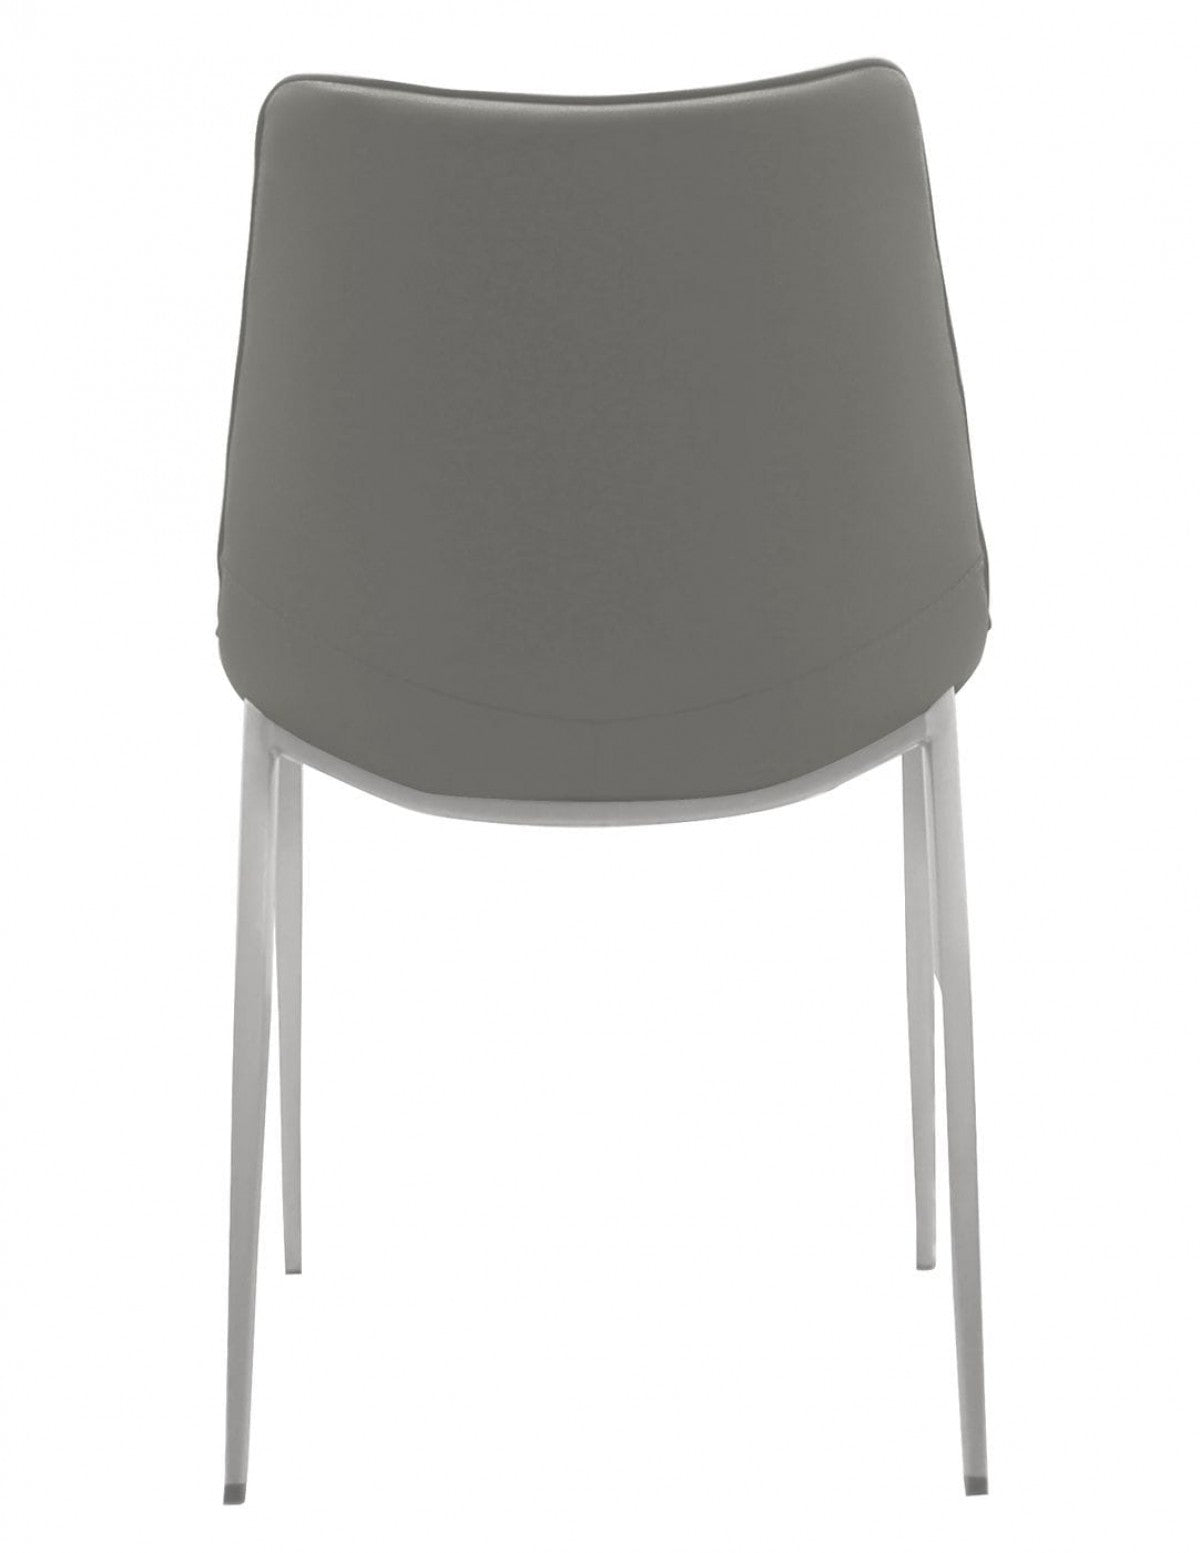 Modrest - Modern Grey Eco-Leather Dining Chair (Set of 2)